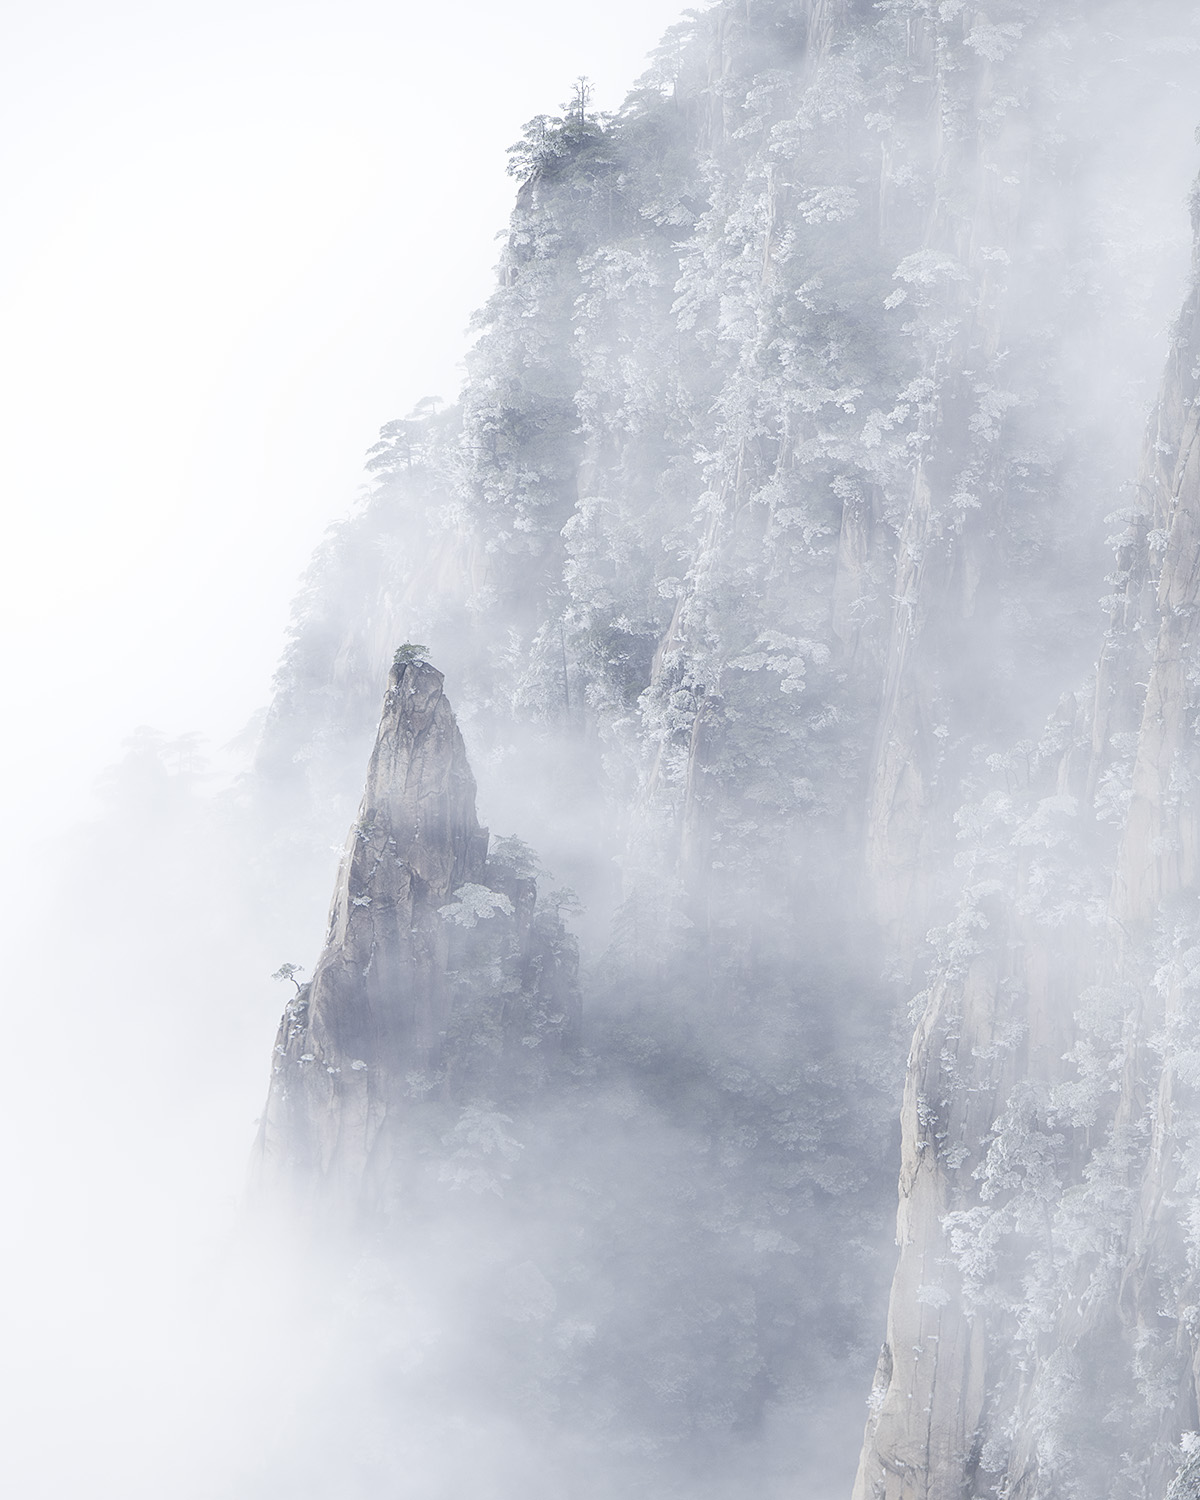 China Photo Tours to the Yellow Mountains in Wintertime